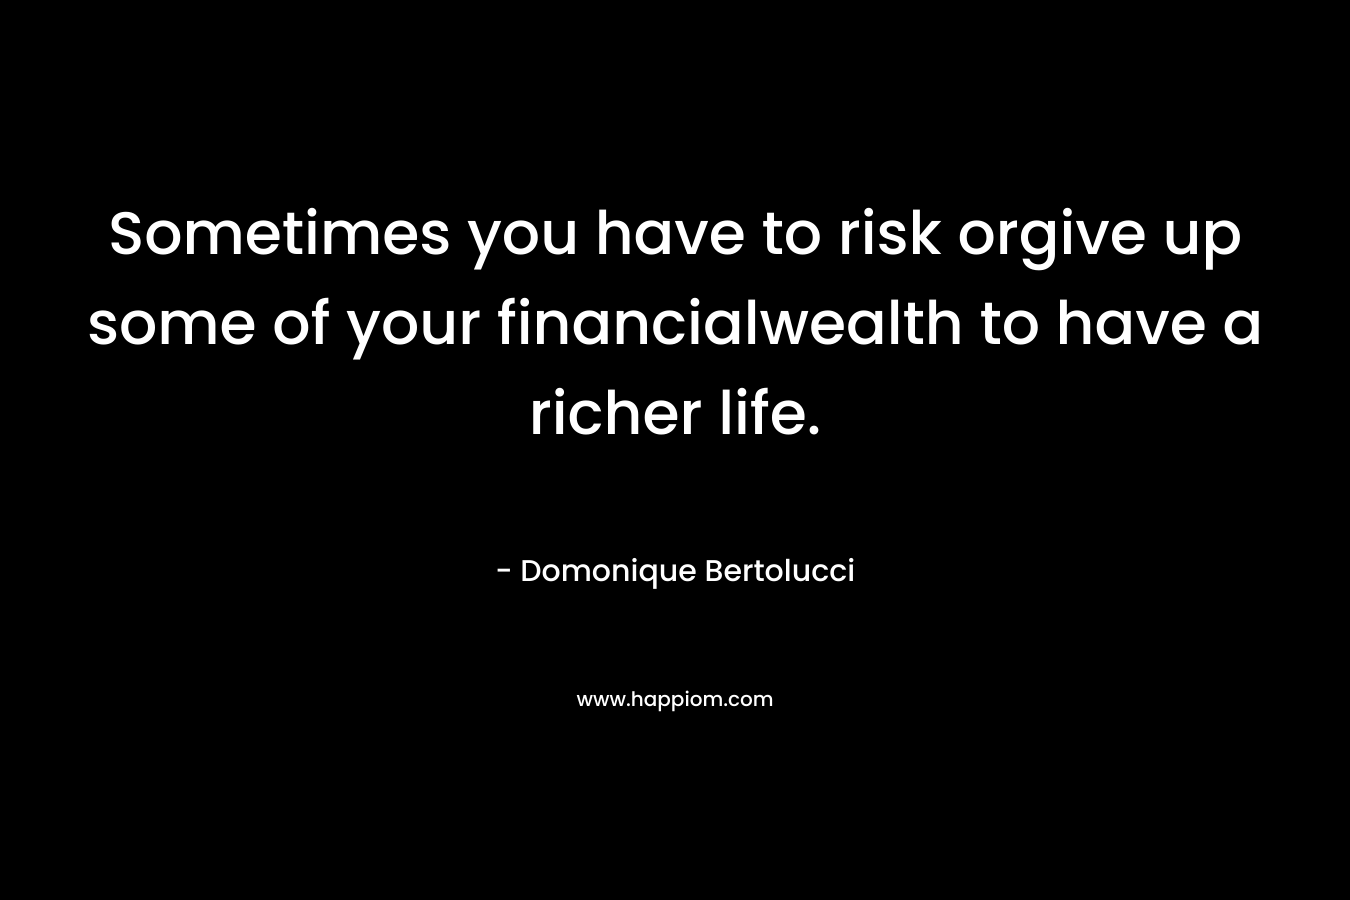 Sometimes you have to risk orgive up some of your financialwealth to have a richer life.